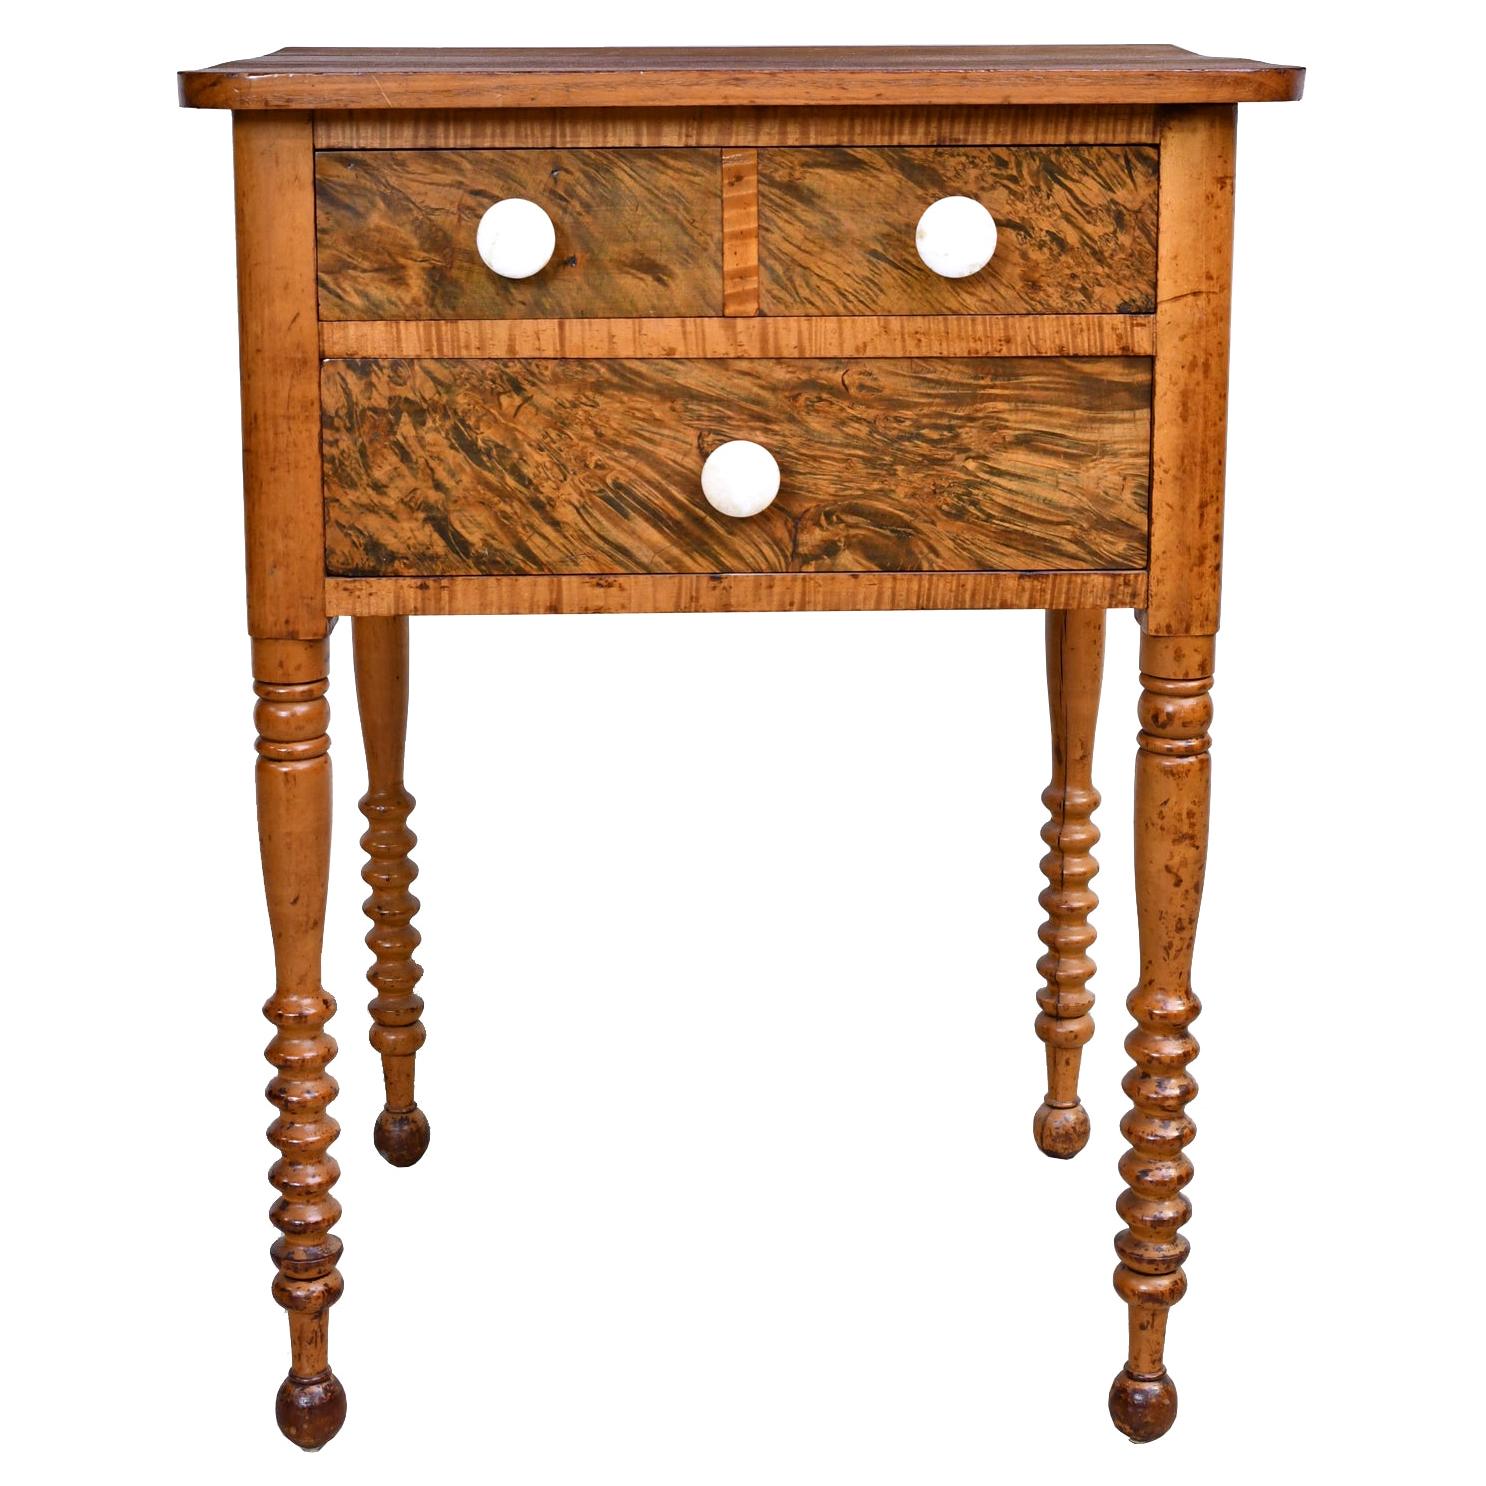 Federal Country Table or Nightstand in Fruitwood with Drawers, Pennsylvania